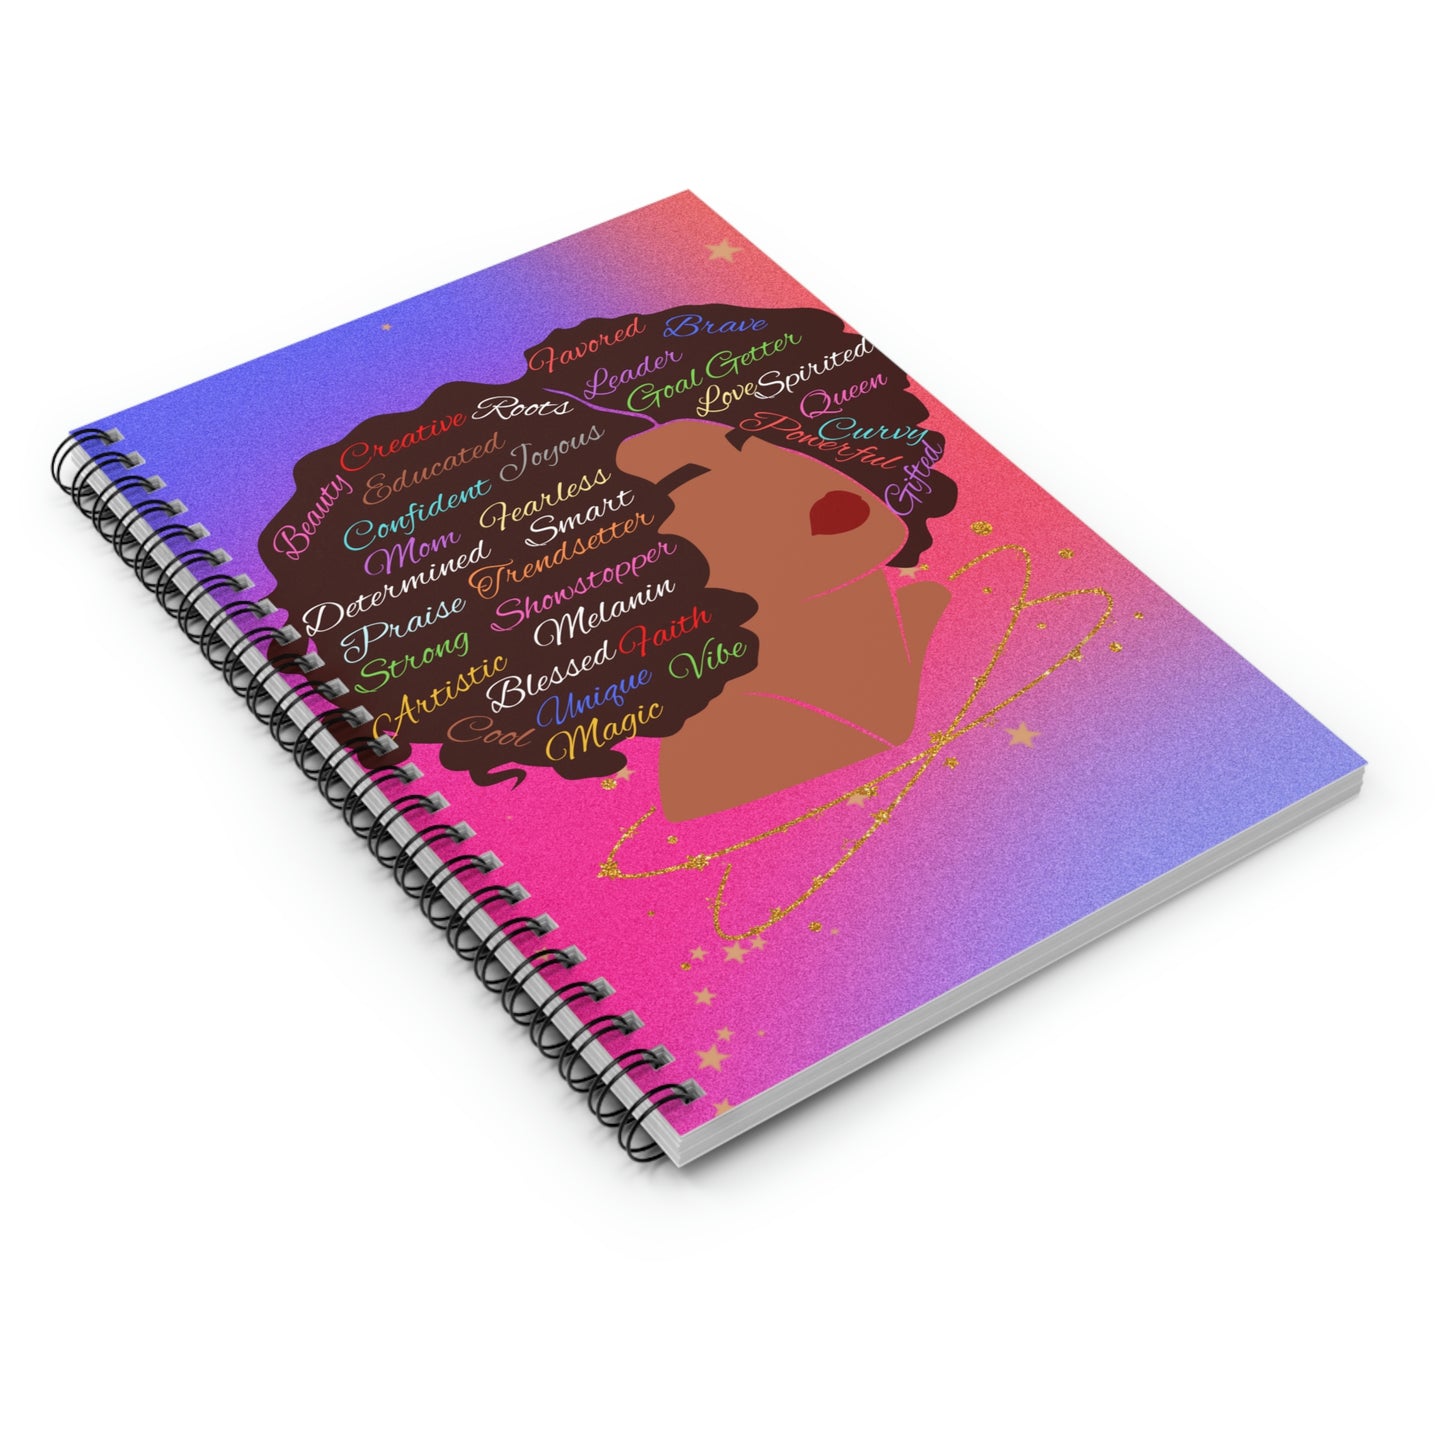 Everything We Are Spiral Notebook/Journal